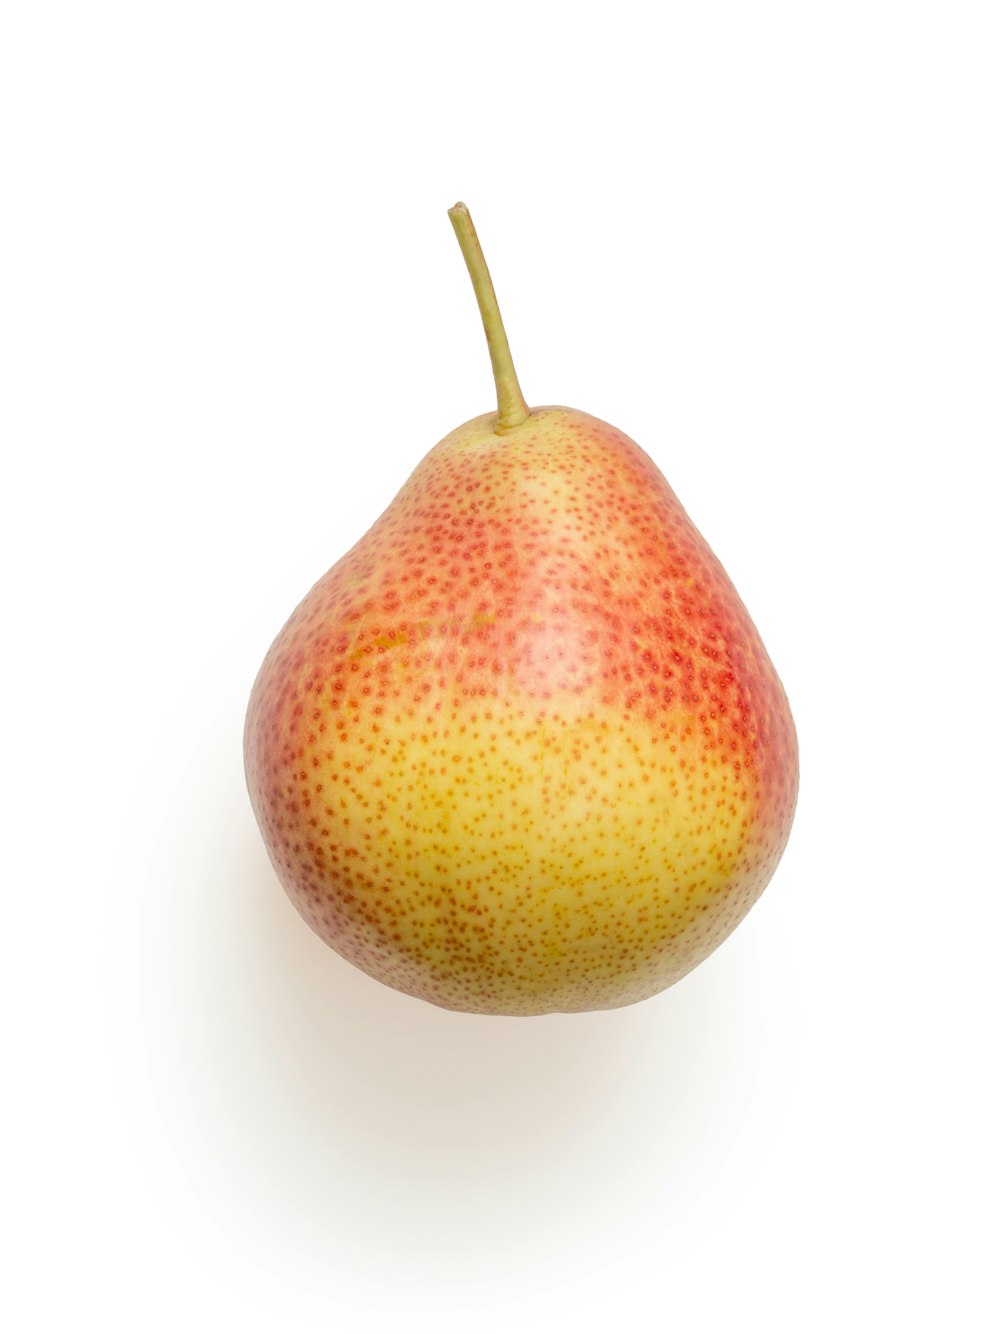 yellow and red round fruit